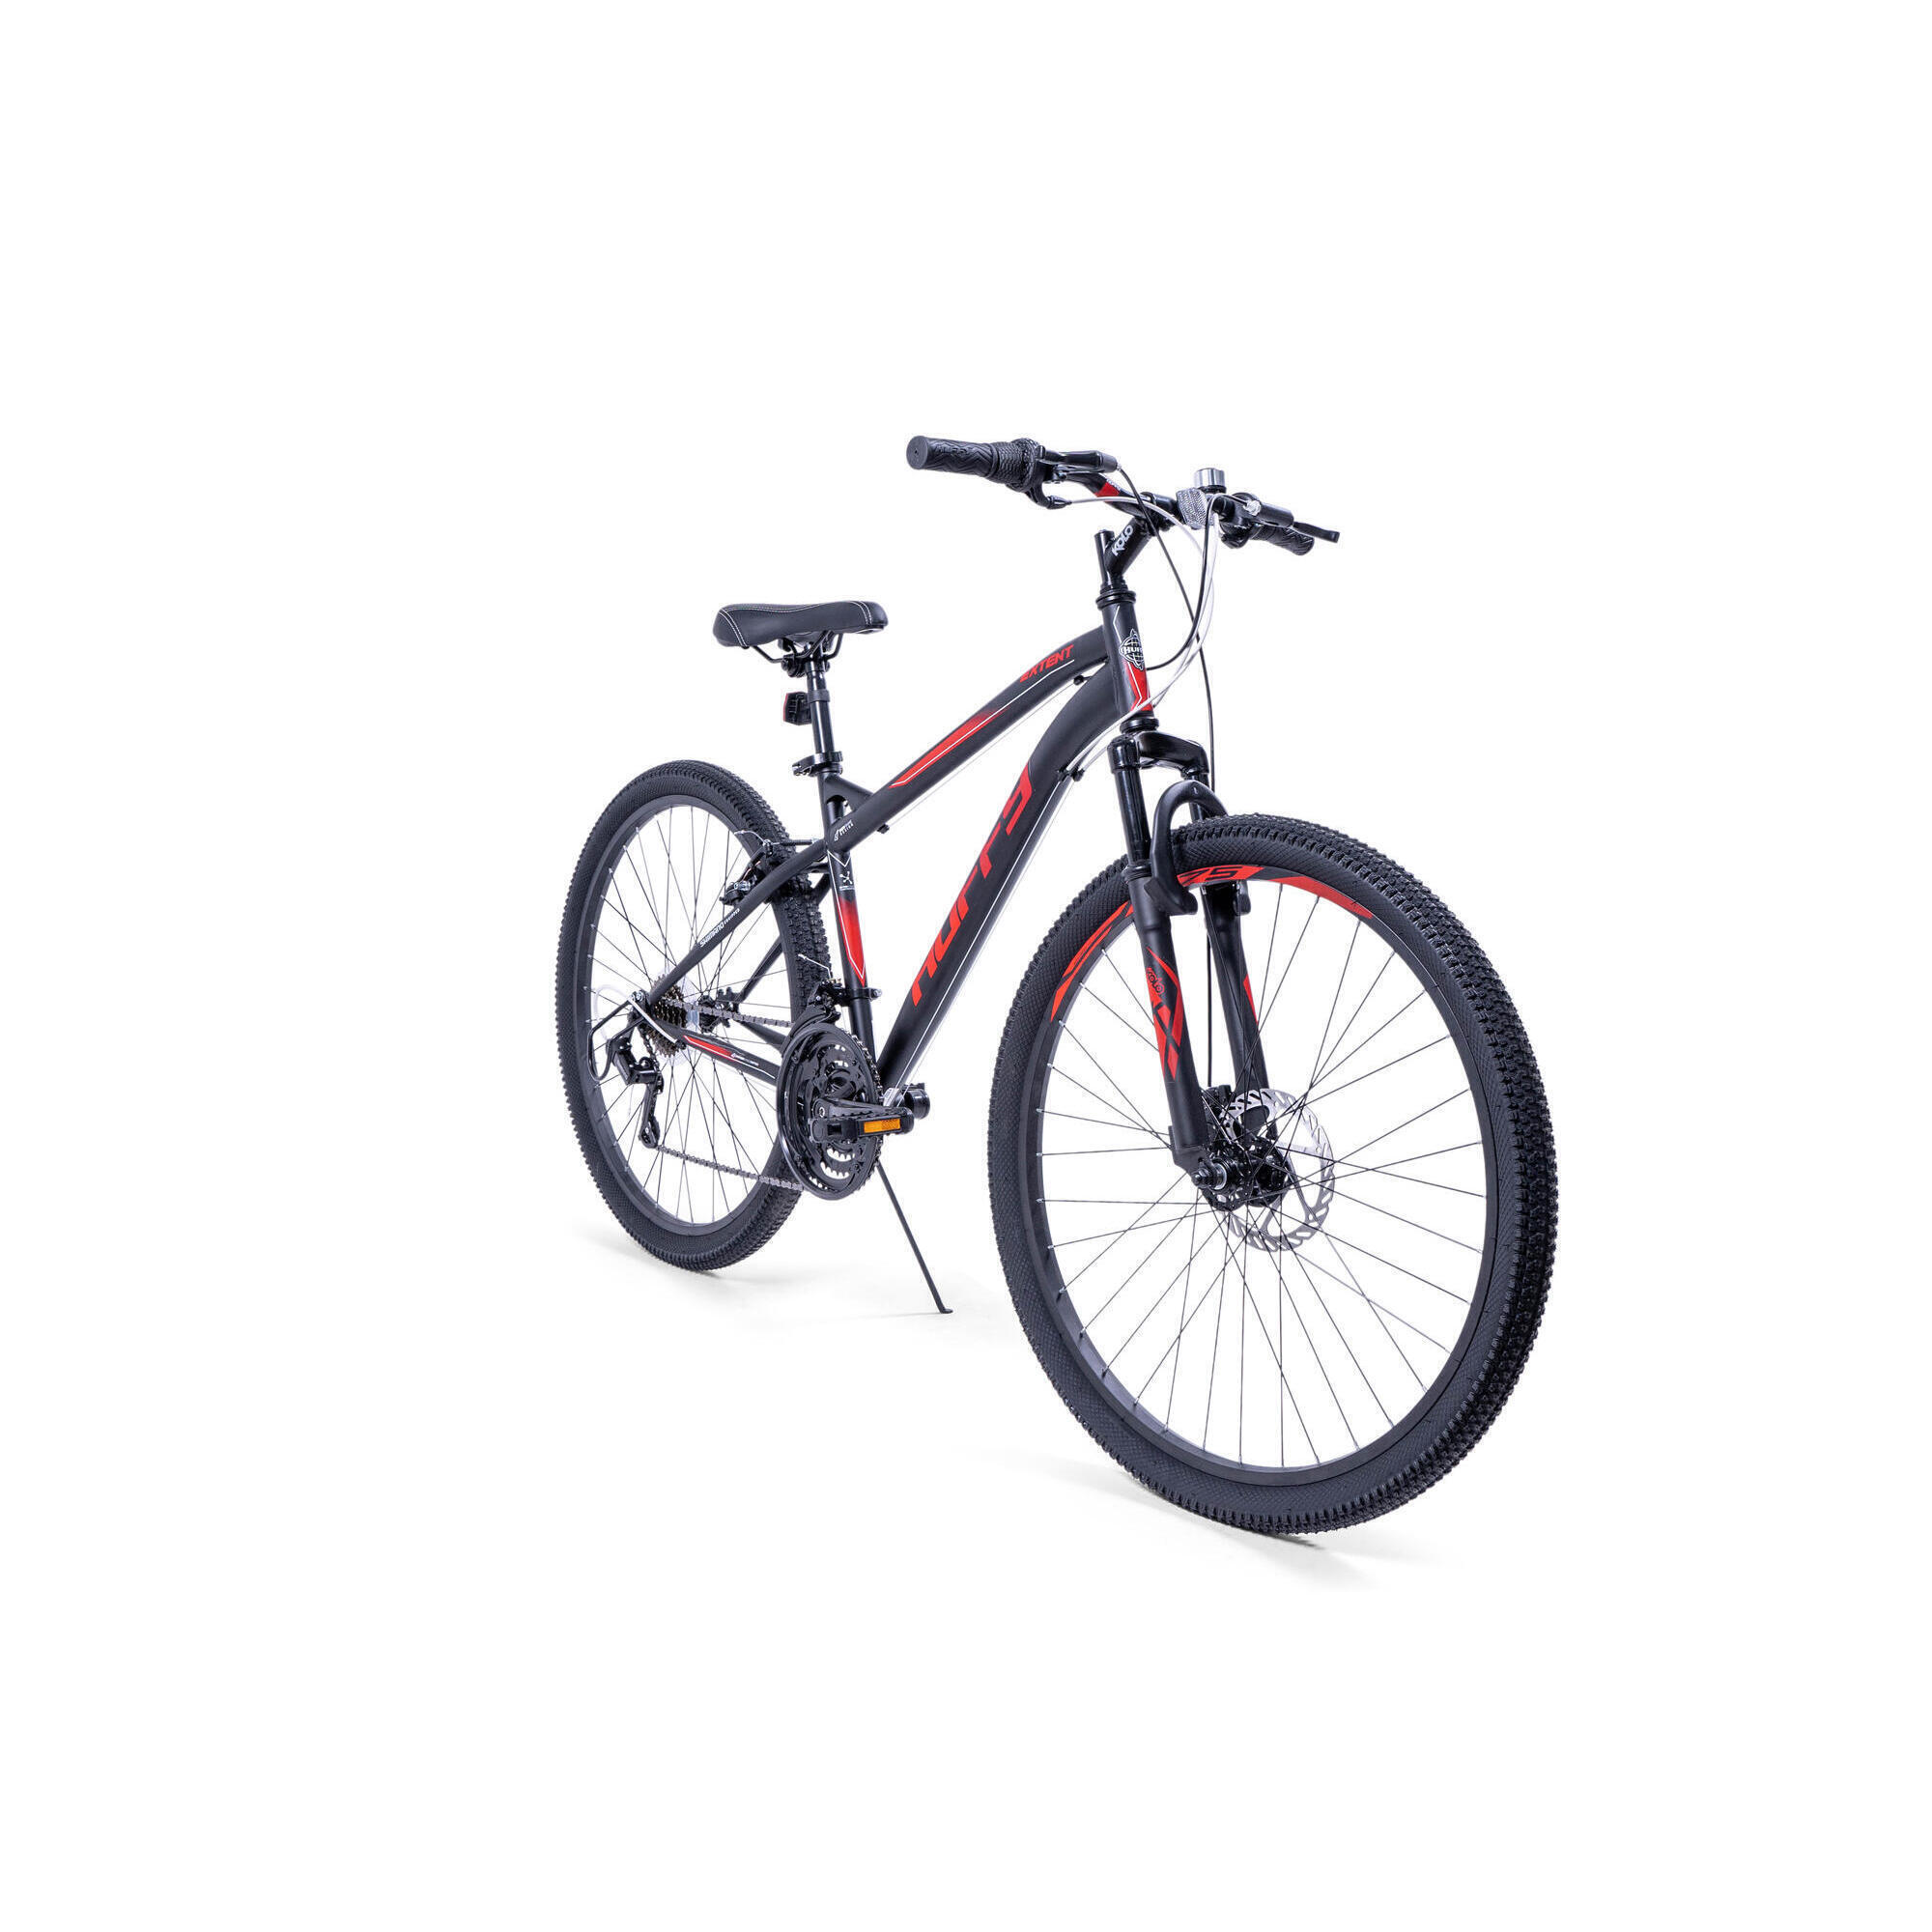 Huffy Extent Mens Mountain Bike 27.5" Wheels 18 Speed Black + Red 3/5